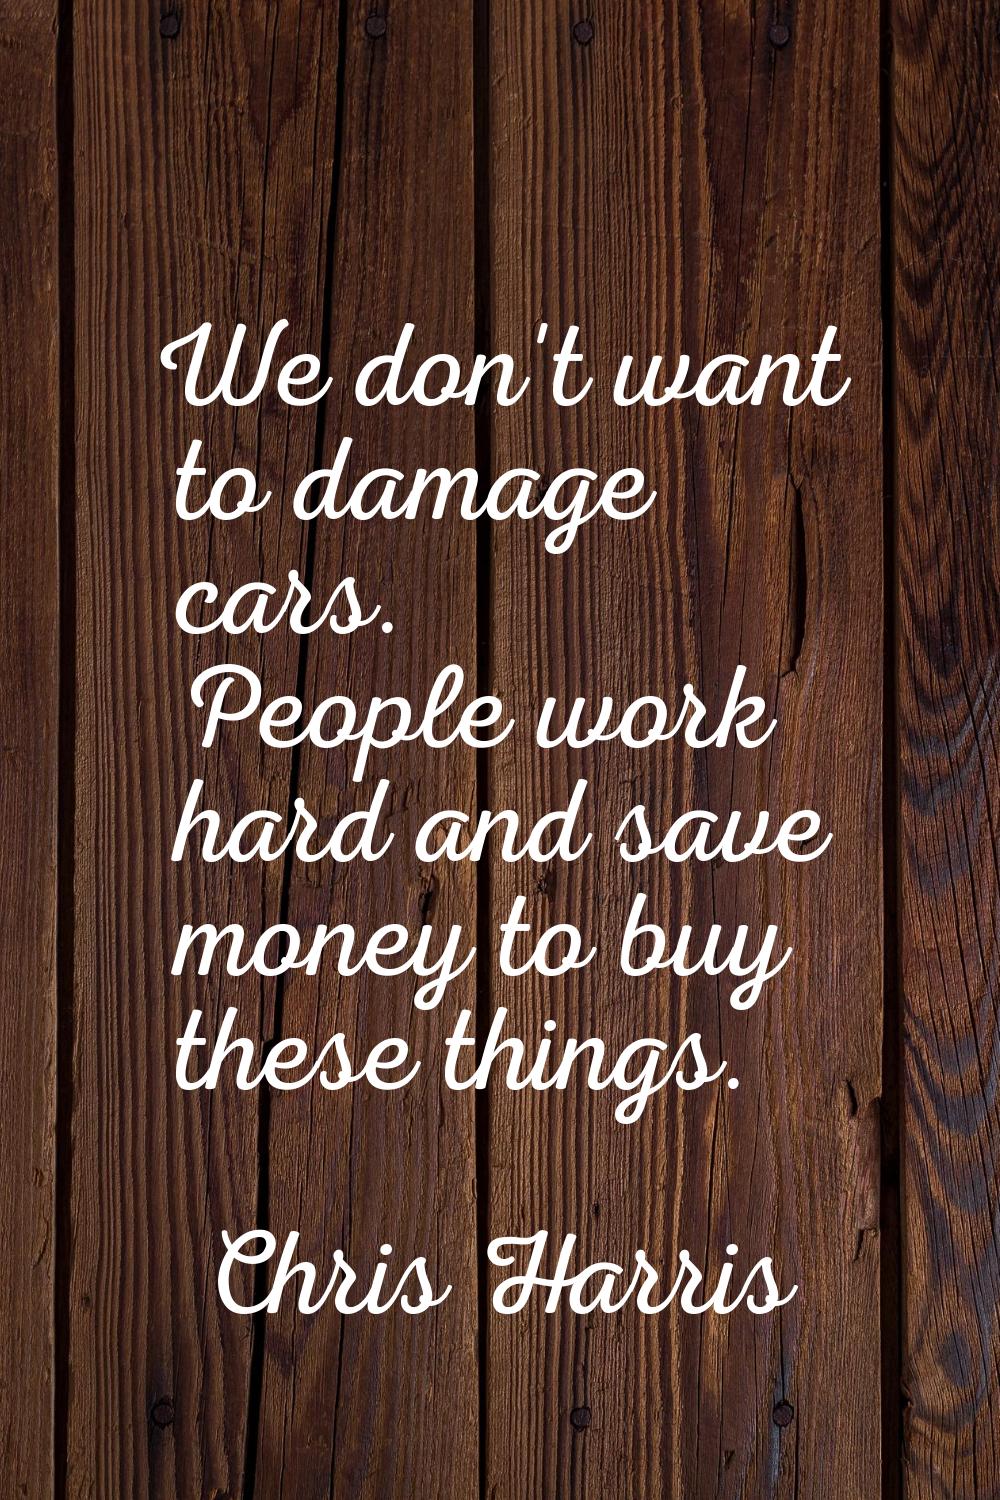 We don't want to damage cars. People work hard and save money to buy these things.